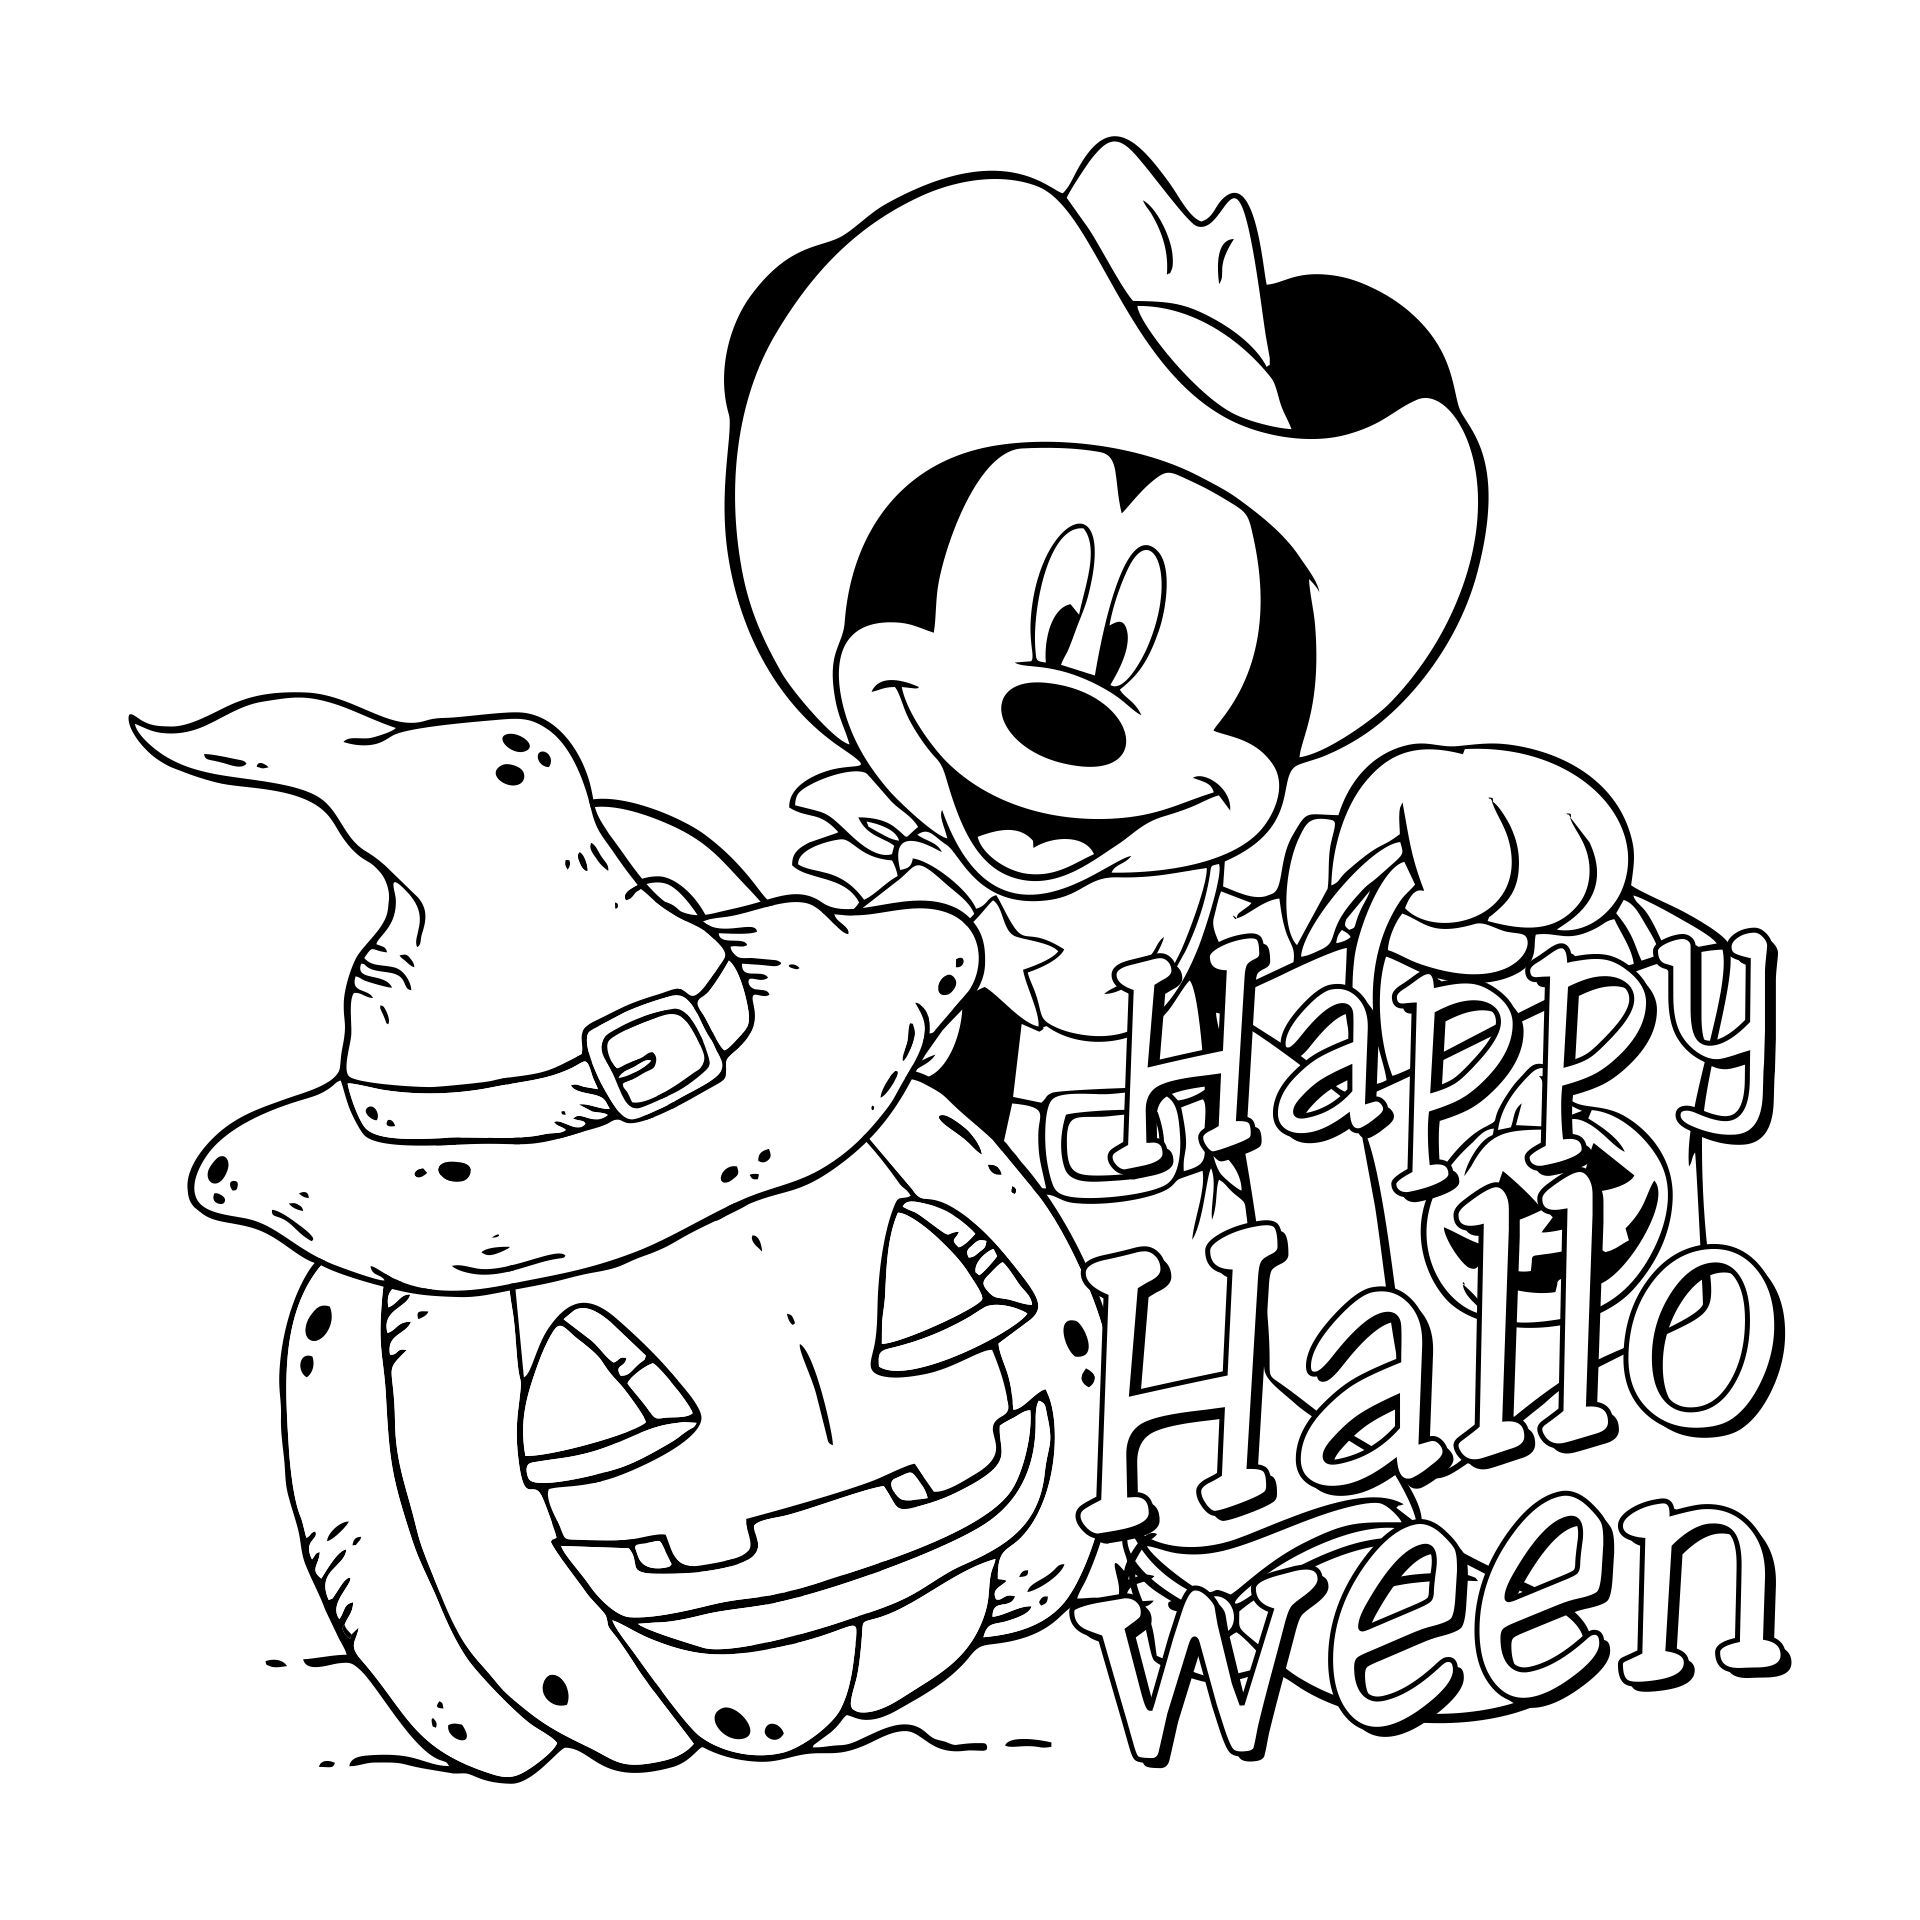 4-best-images-of-free-printable-halloween-coloring-worksheets-free-printable-mickey-mouse